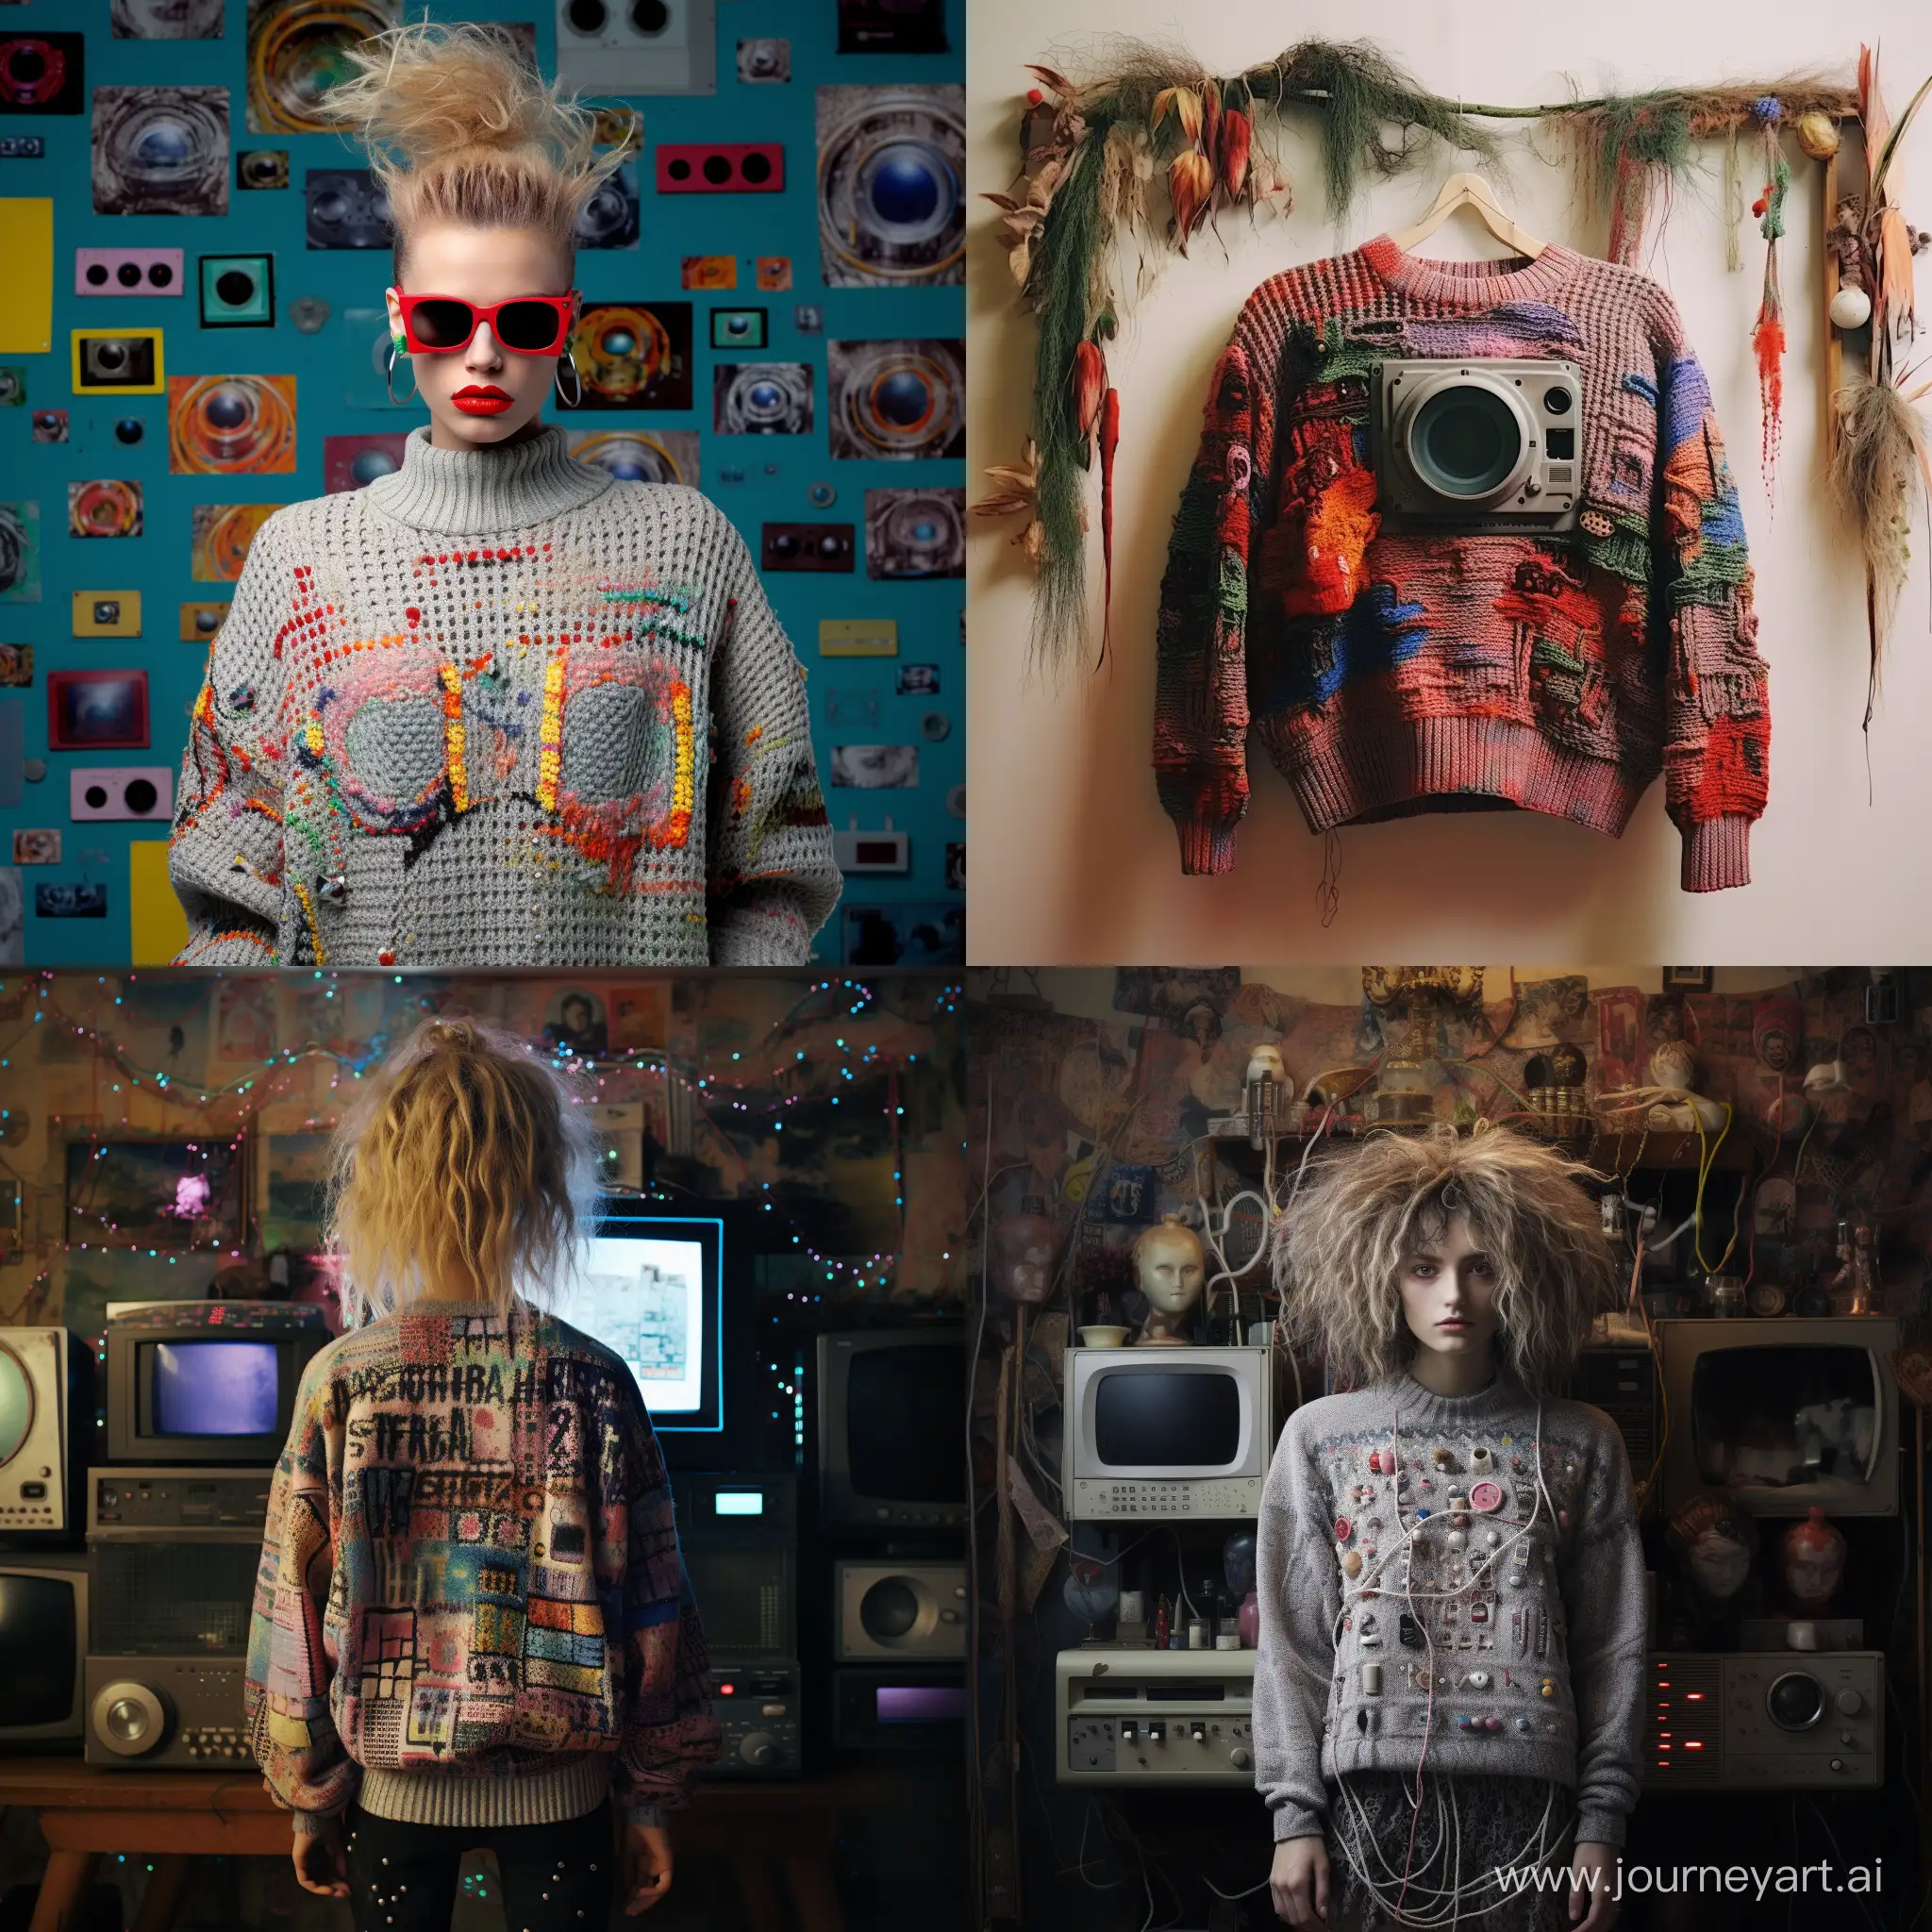 A photo of an oversize knitted sweater with a flat image on the sweater on which the computer controls the world, it conquered every person and plant, the image is connected from threads, punk style of the 80s